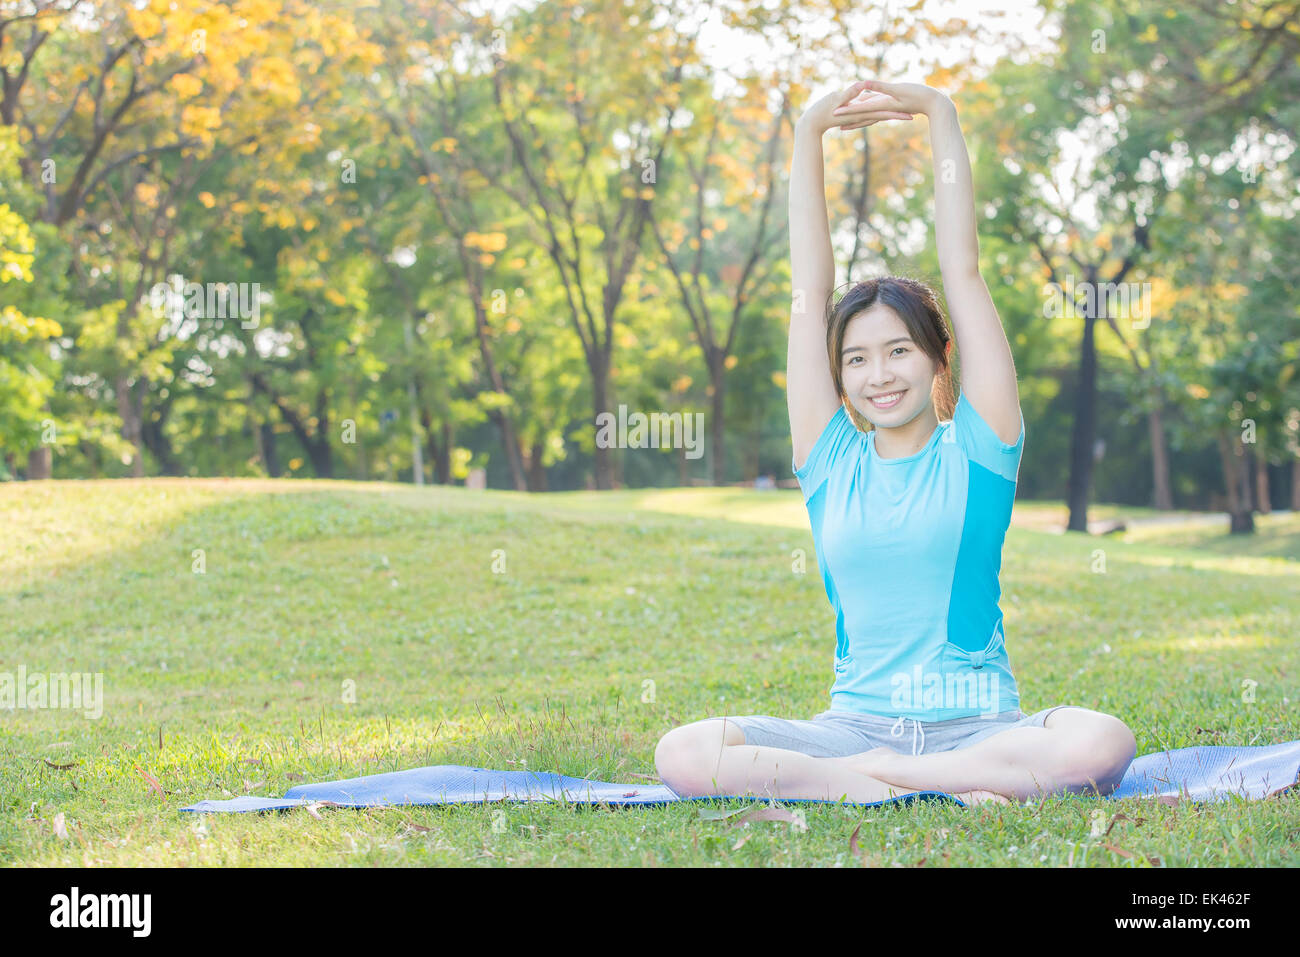 fitness, sport, training and lifestyle concept - Asian woman stretching outdoors Stock Photo